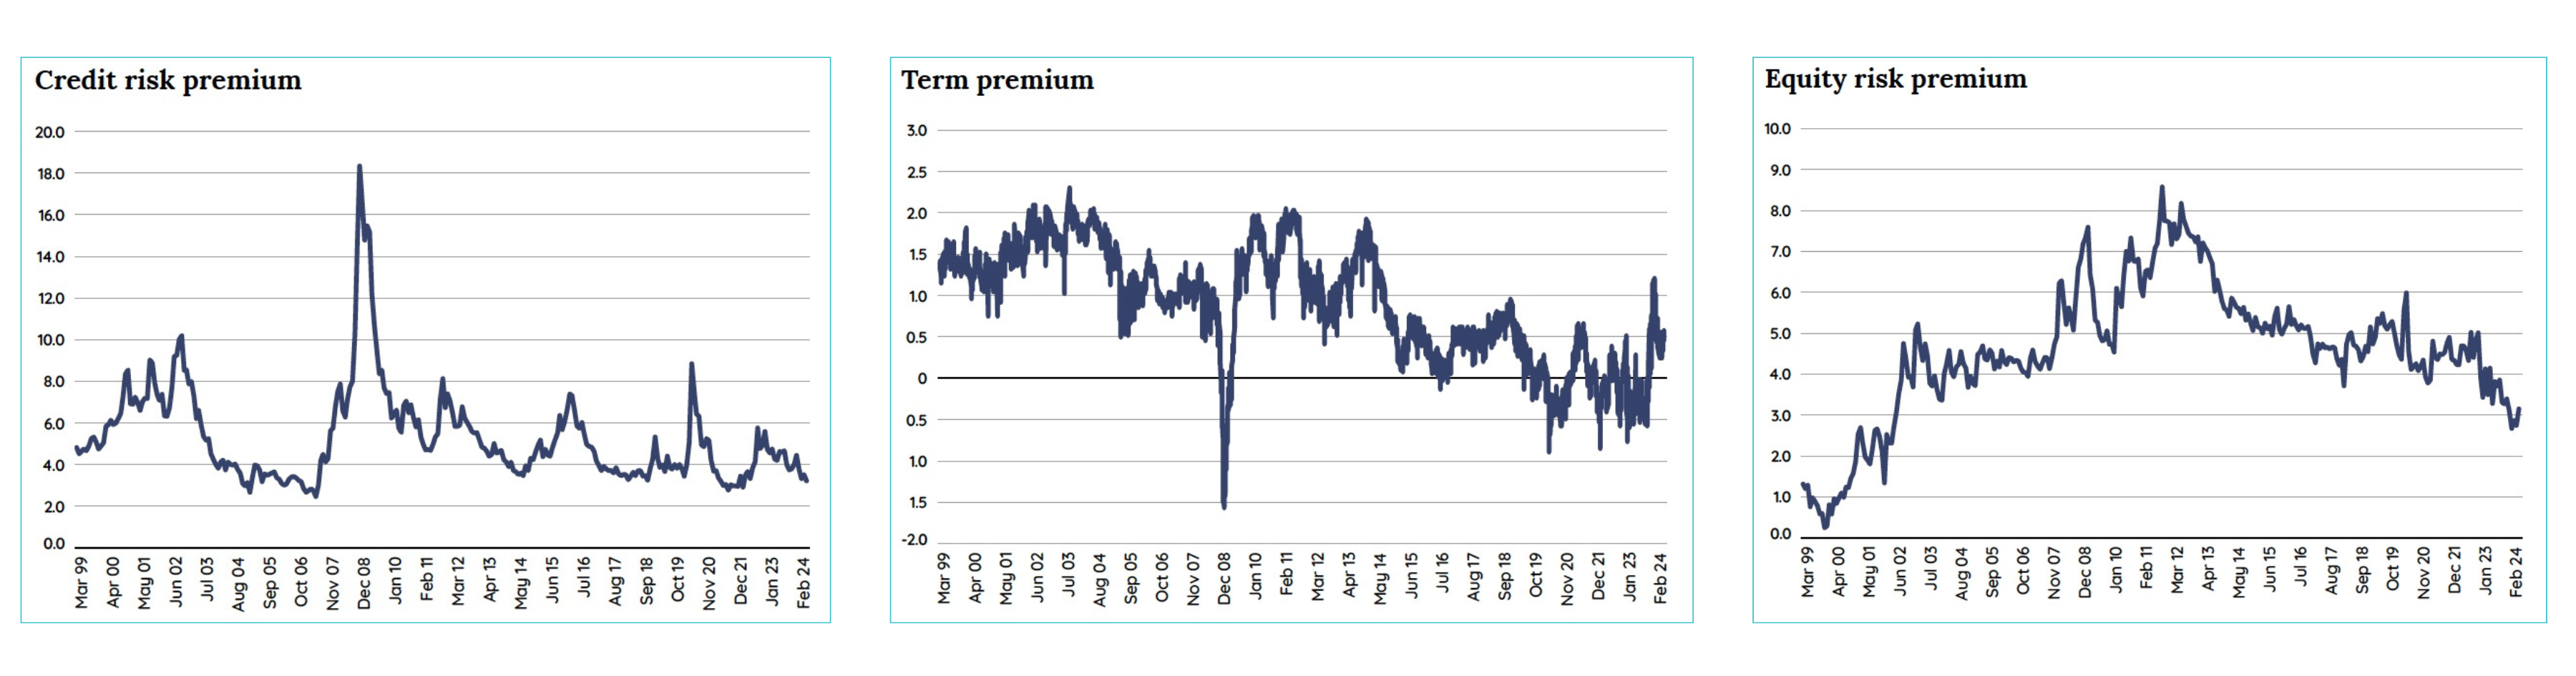 
The charts above show the current status of US risk premia. The credit risk premium, represented by the spread of high yield bonds over Treasury bond yields, is at 3.1%, near the bottom of its historic range (average 5.2%, higher 92% of the time). The term premium, after trending lower for 25 years due to collapsed inflation expectations, is currently at 0.5% (average 0.9%, higher 71% of the time). Last, the equity risk premium, the spread of earnings yield on the S&P 500 over the real ten-year Treasury yield, dropped below 3% in November 2023 for the first time since the dot-com bubble (average 4.6%, higher 85% of the time). 
(Sources: Bloomberg; Durham, J. Benson, 2023, Financial Analysis Journal, vol. 79, no.2)
